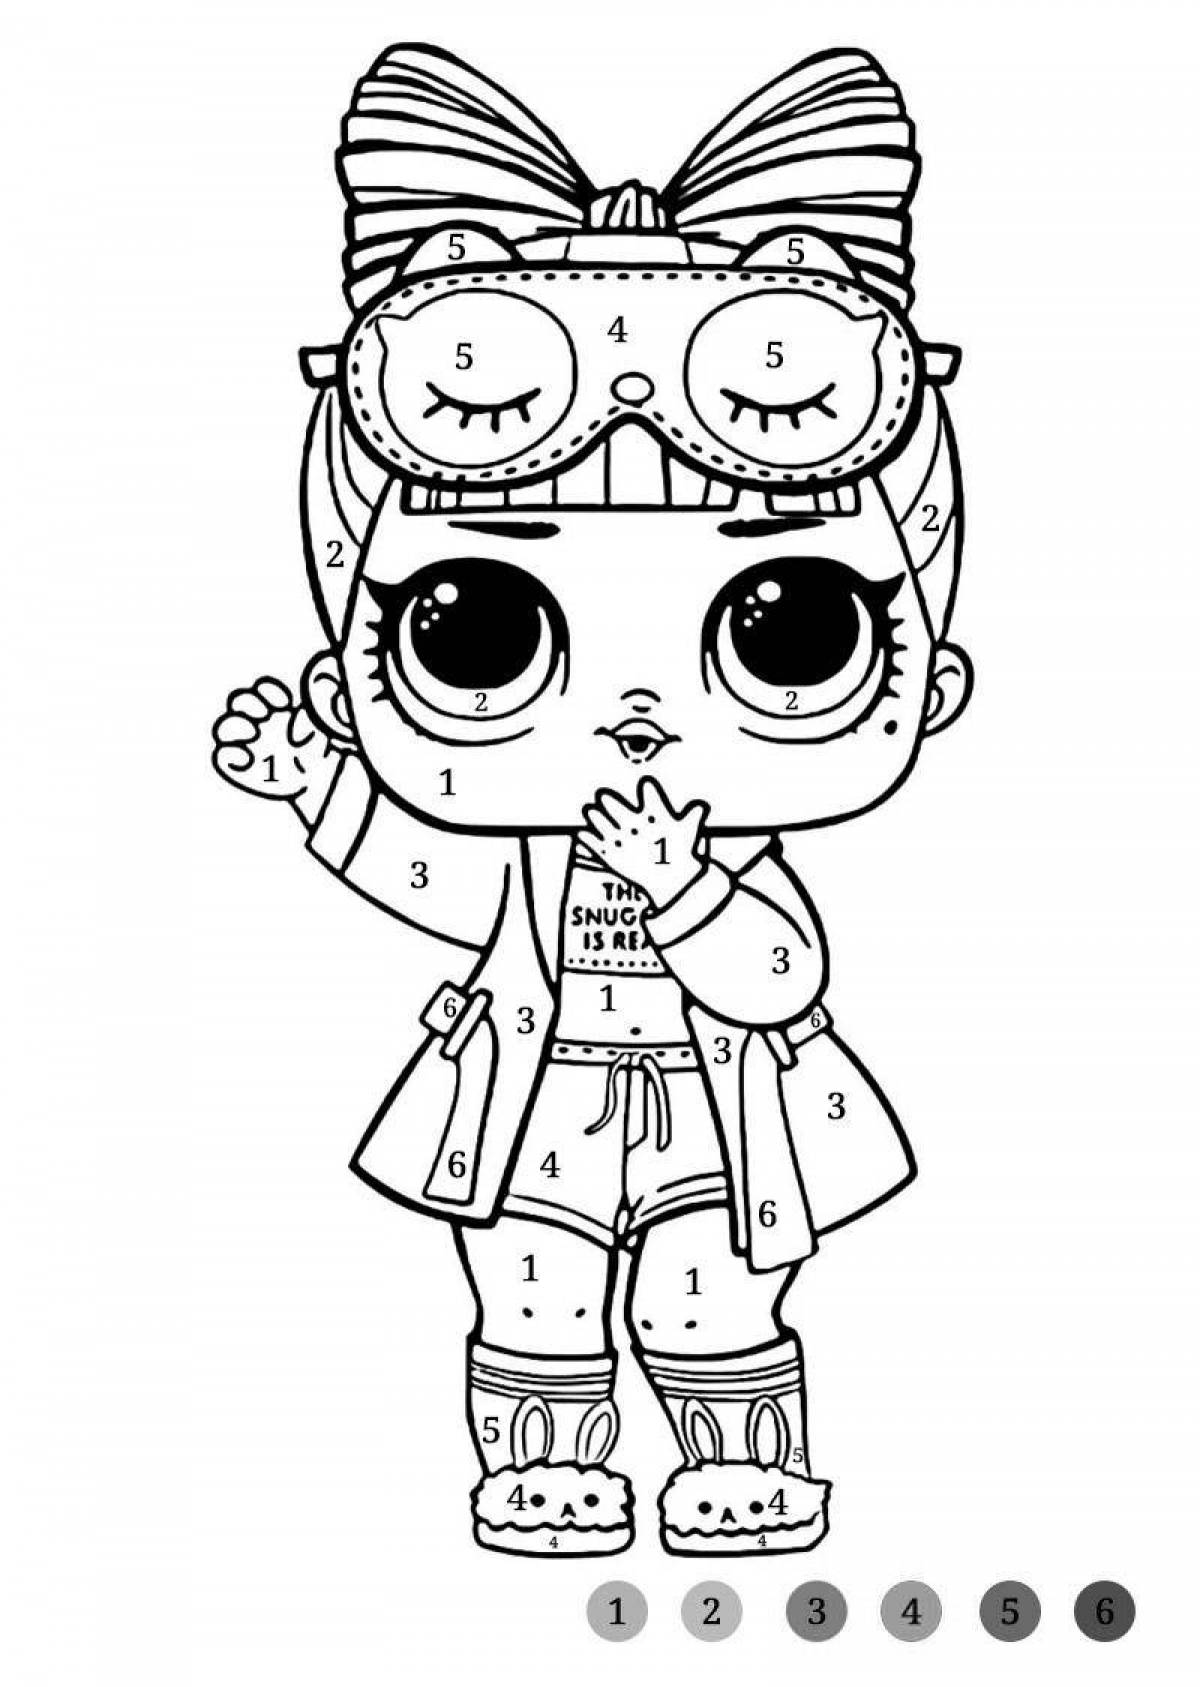 Attractive lol print doll coloring pages